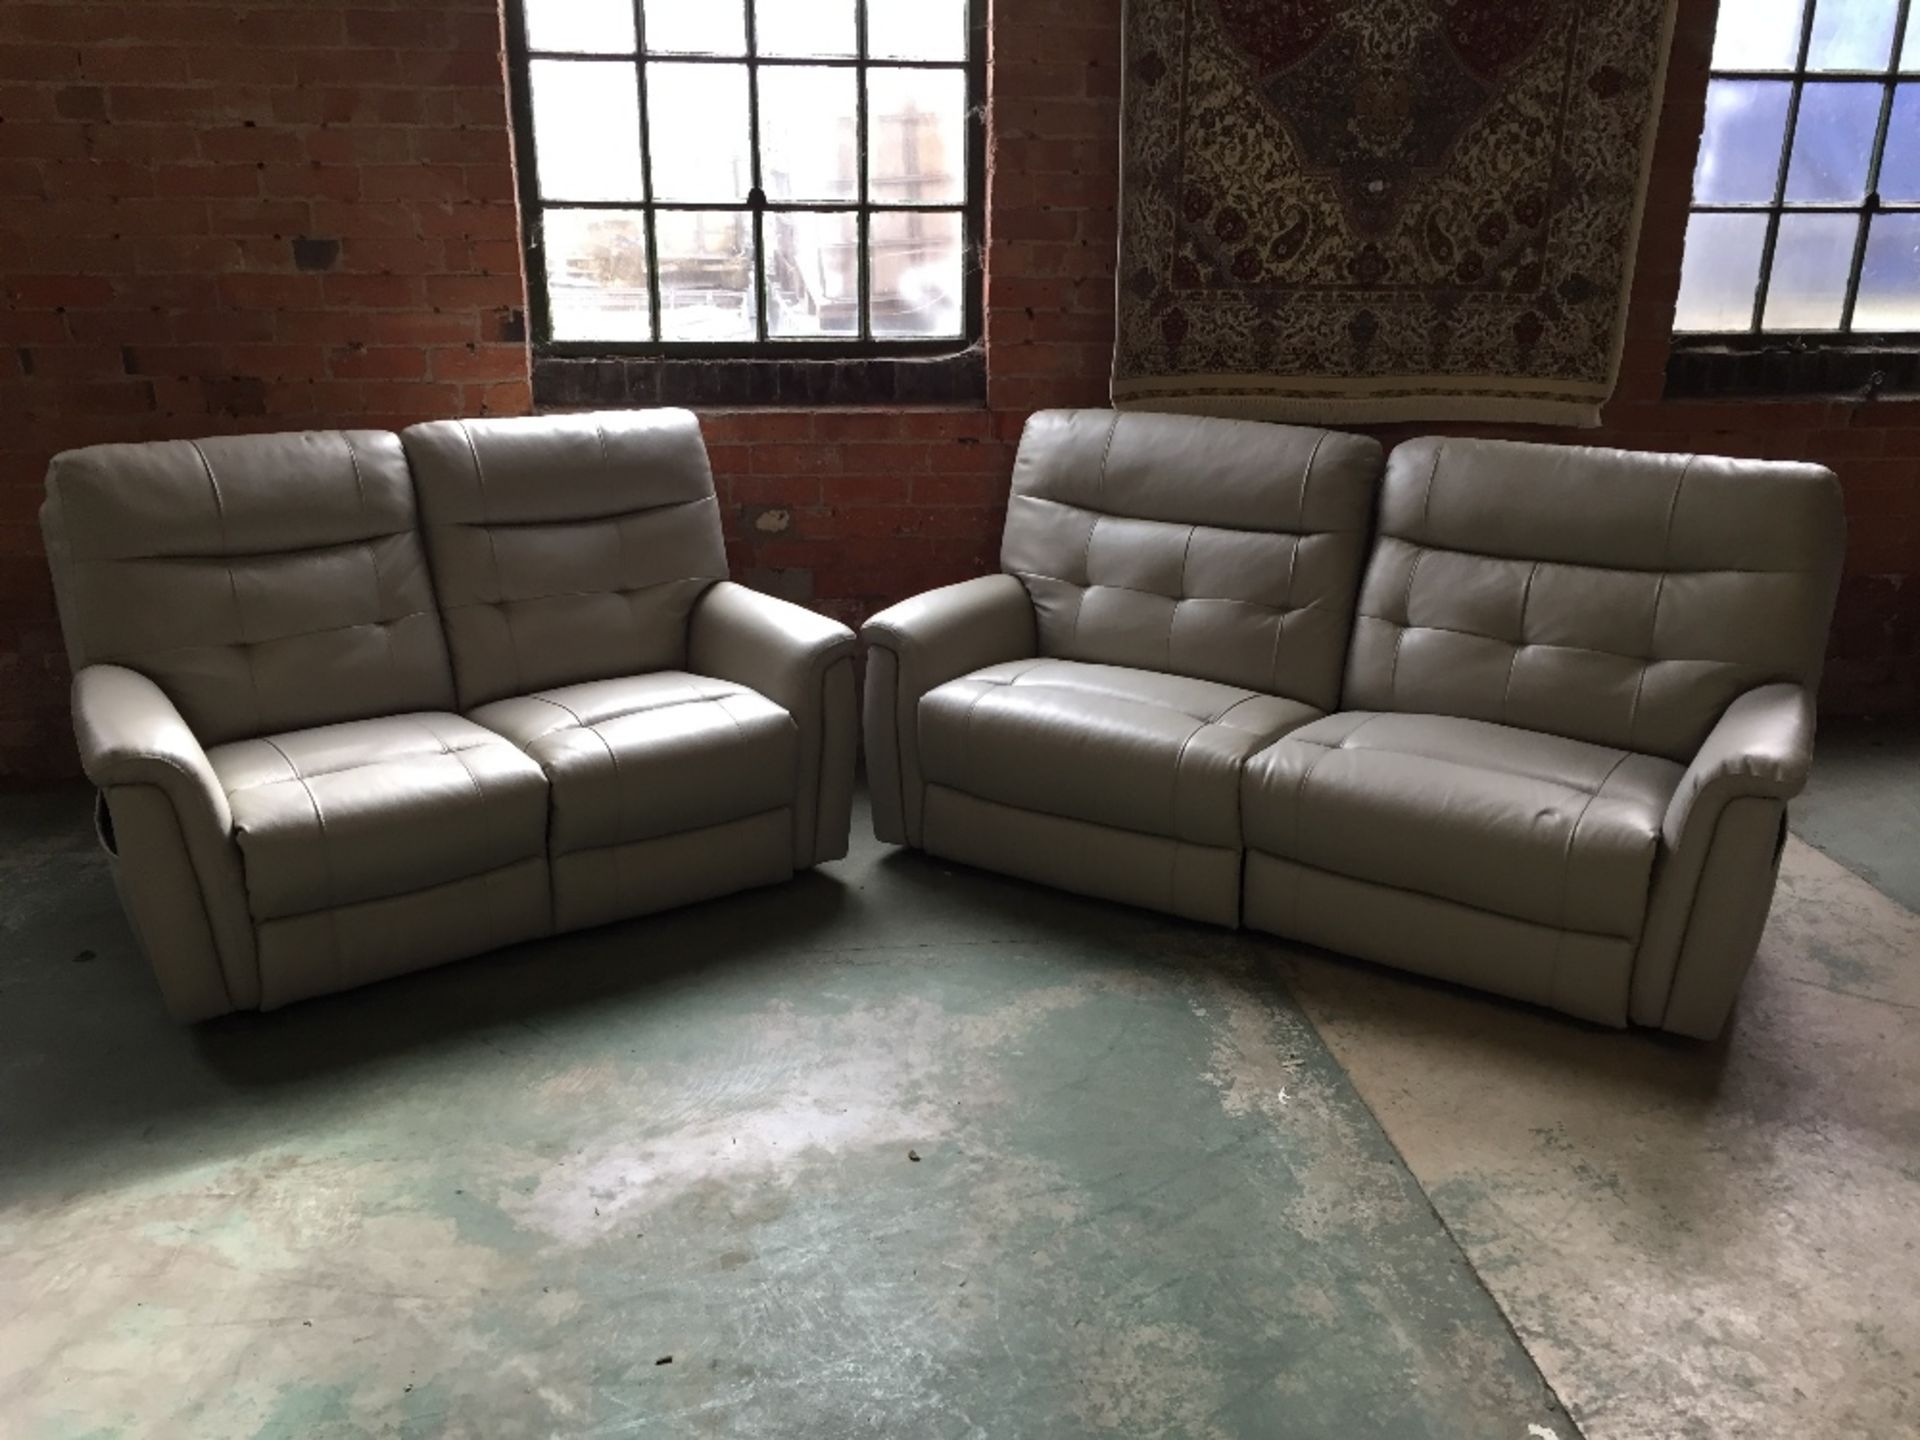 GREY ELECTRIC RECLINING 3 SEATER SOFA AND 2 SEATER